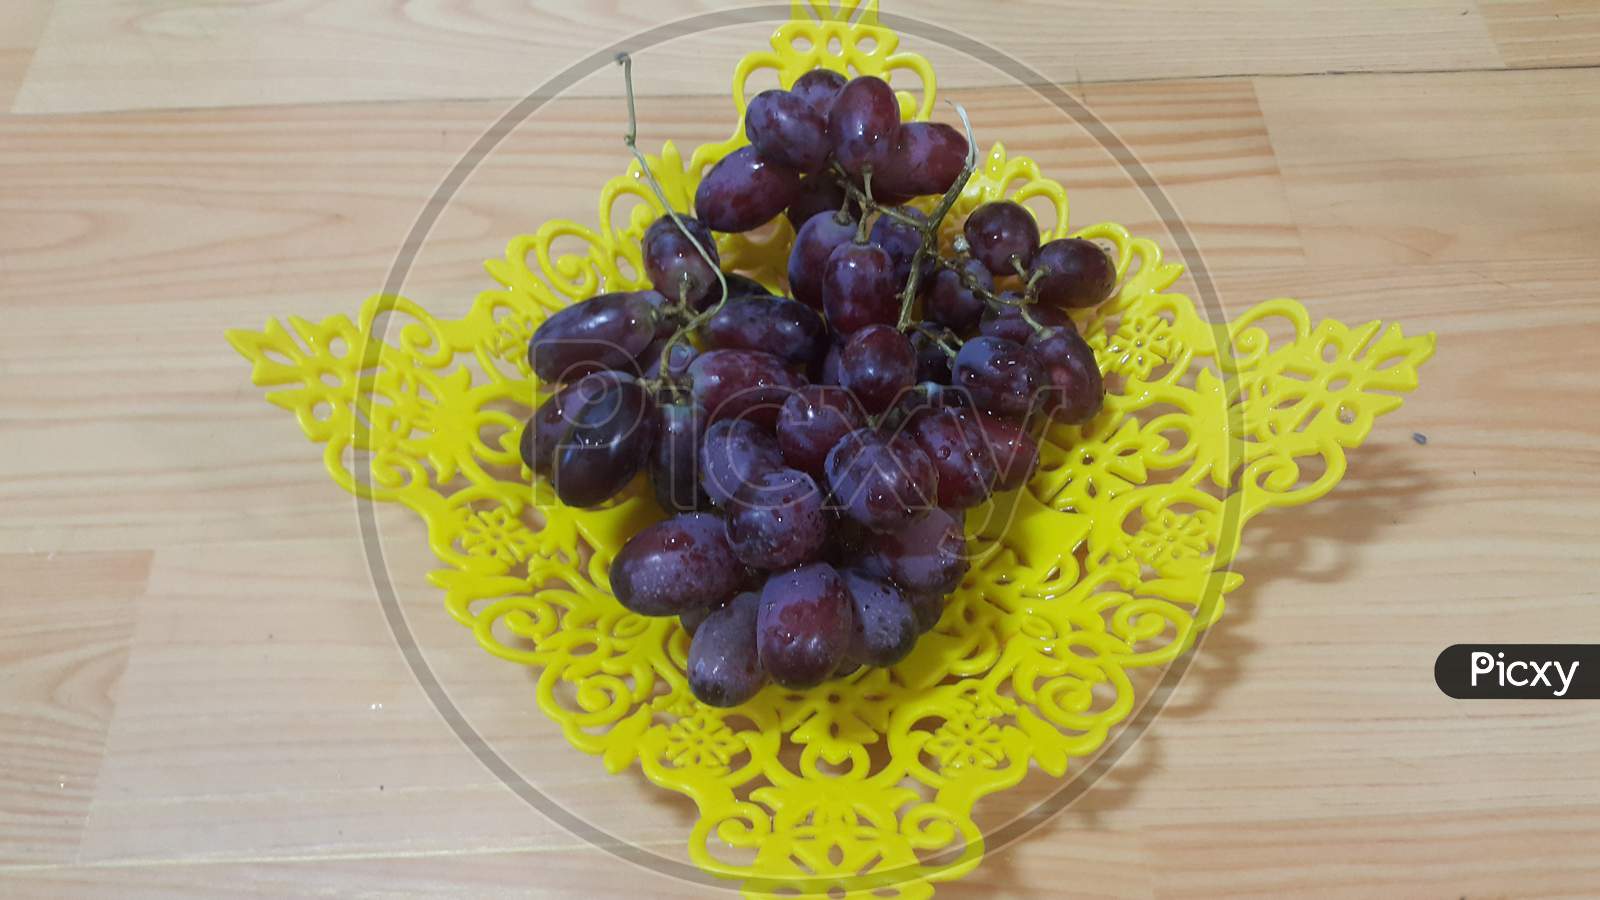 Close Up View Of Bunches Of Brown Grapes Served In Yellow Plastic Fruit Tray